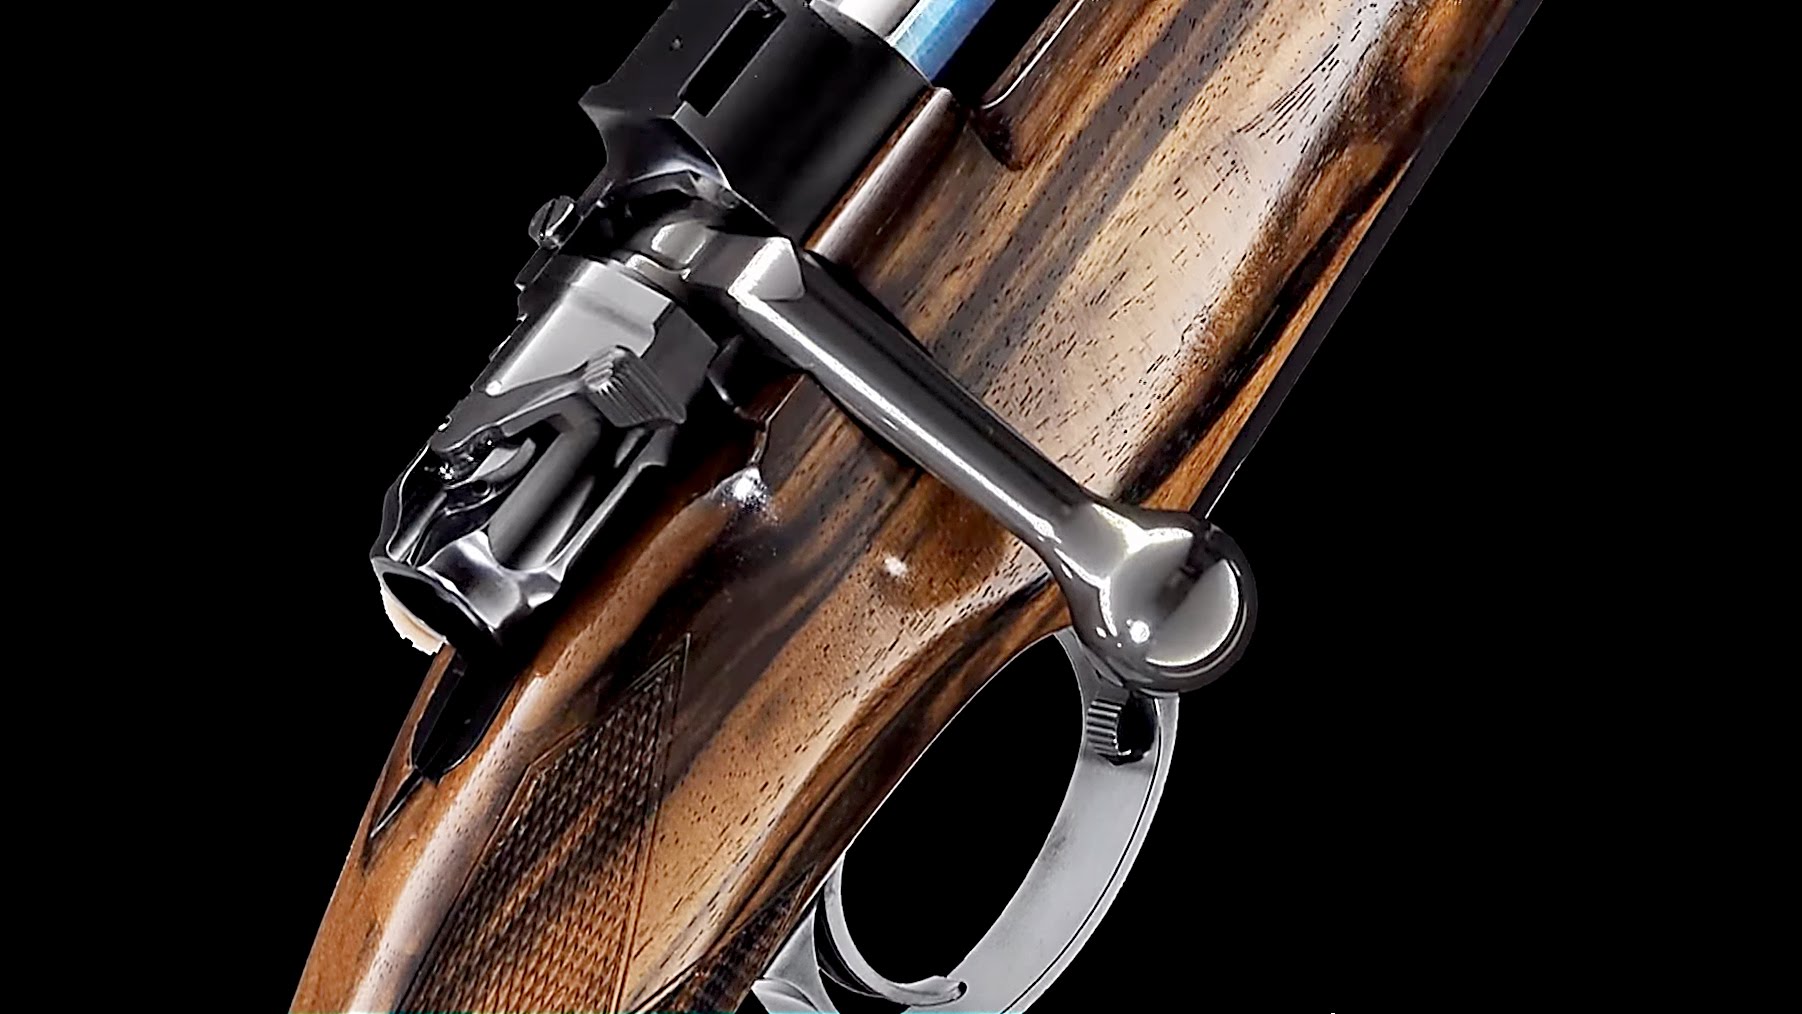 The three position safety of the double square bridge Rigby Big Game Rifle is designed to accommodate use with optical sights. (Picture courtesy of Rigby).